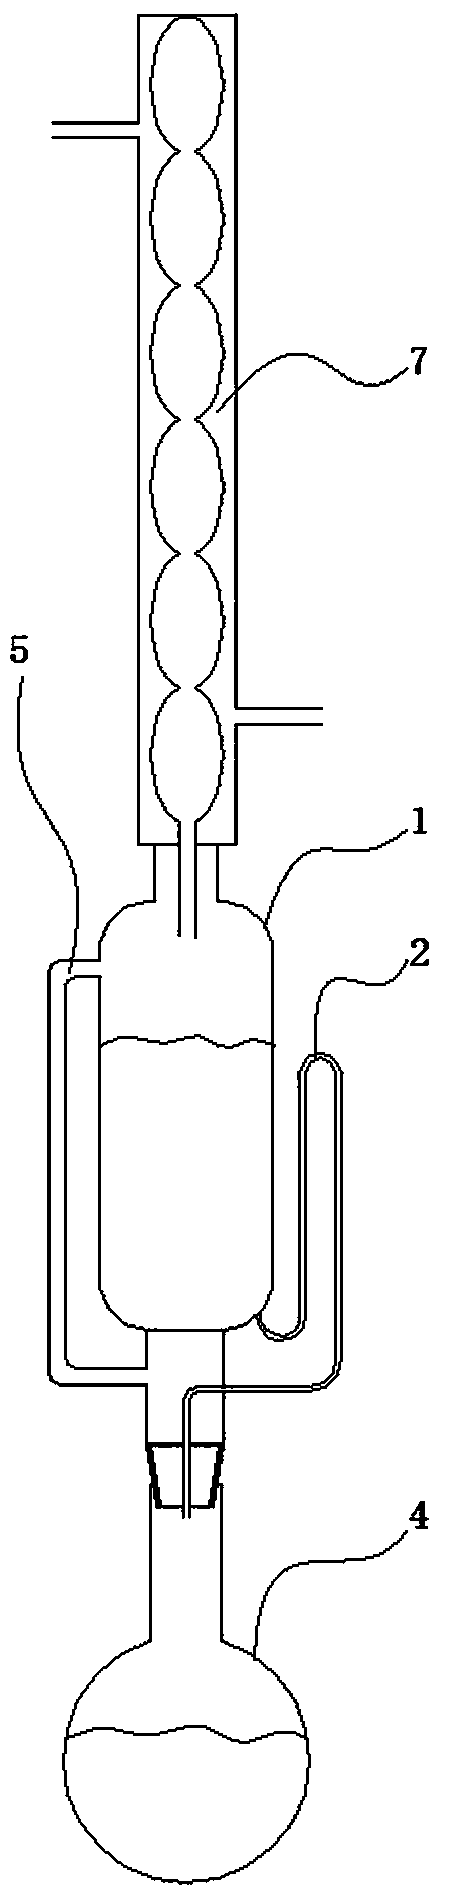 Soxhlet extractor capable of preventing thermal degradation